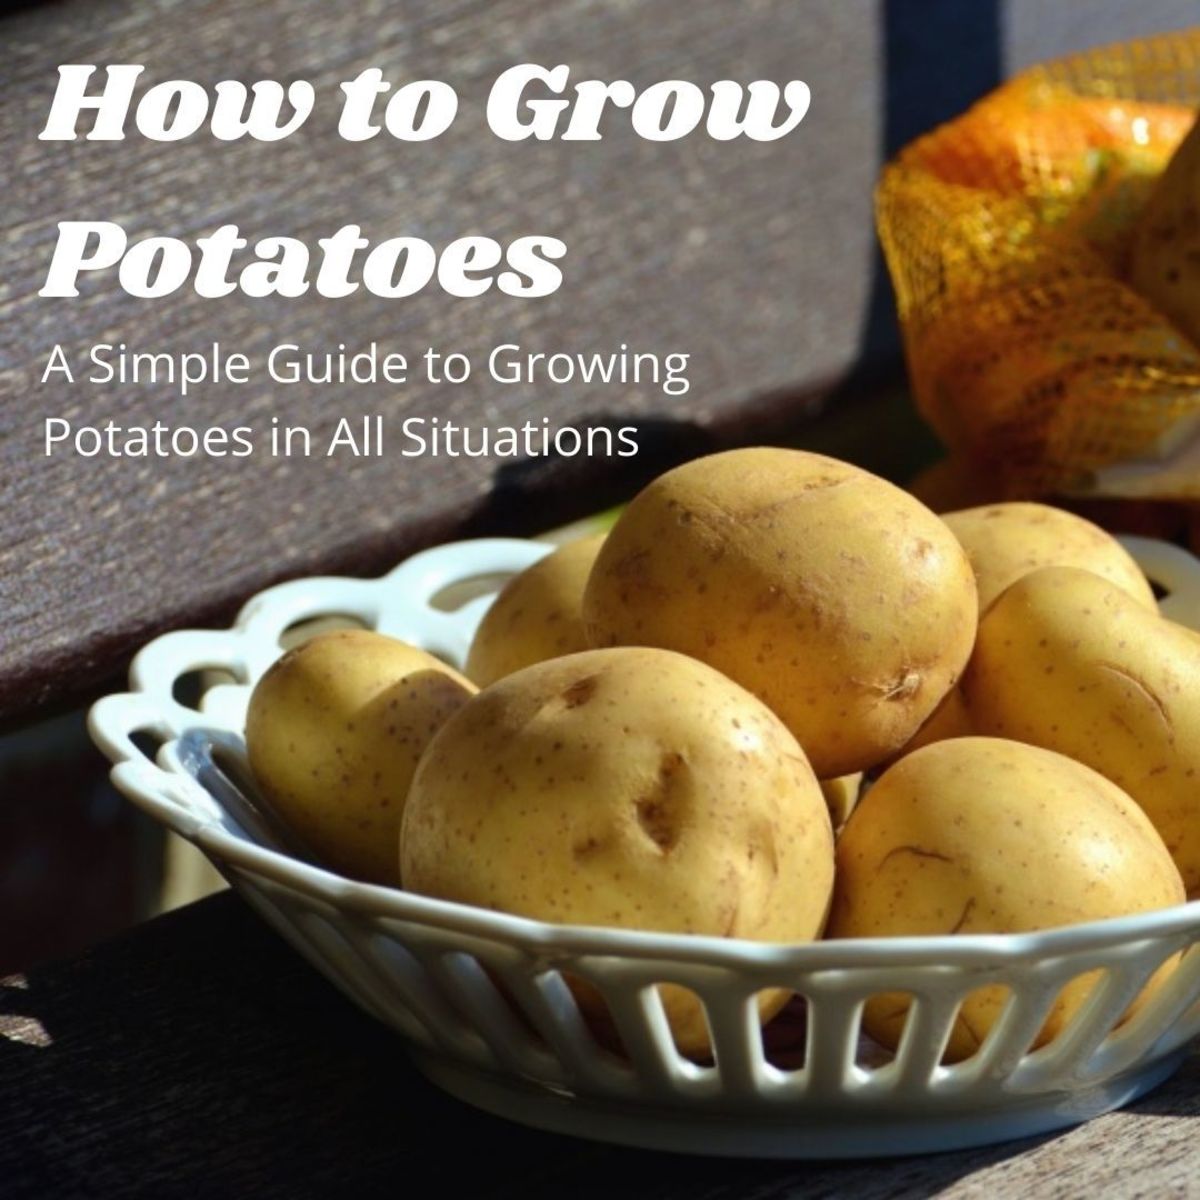 How to Grow Potatoes: Easy Potato Growing Methods for All Situations